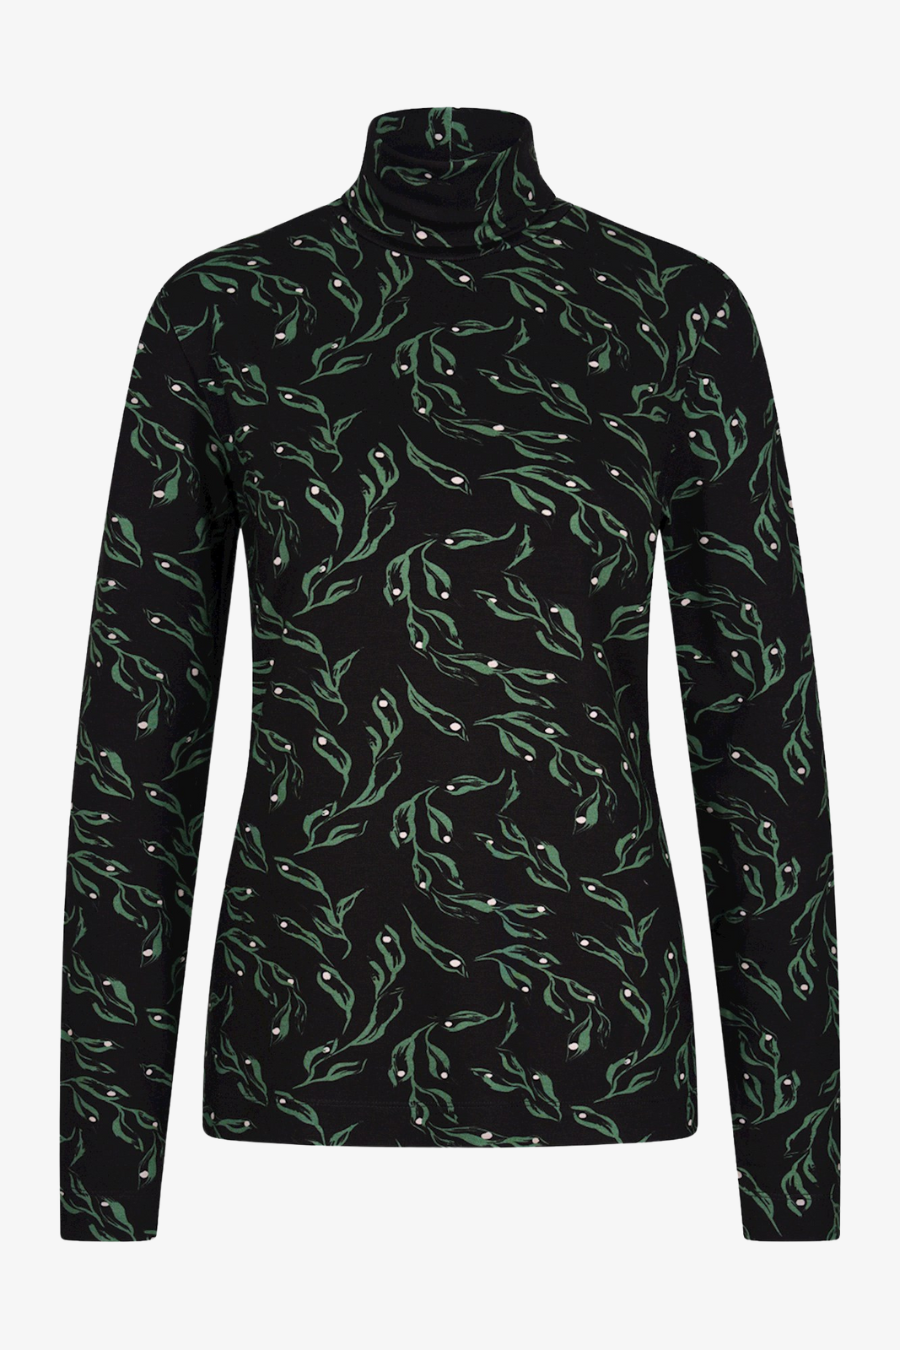 Black with Green Leaves Print Jersey Turtle Neck ONLINE ONLY